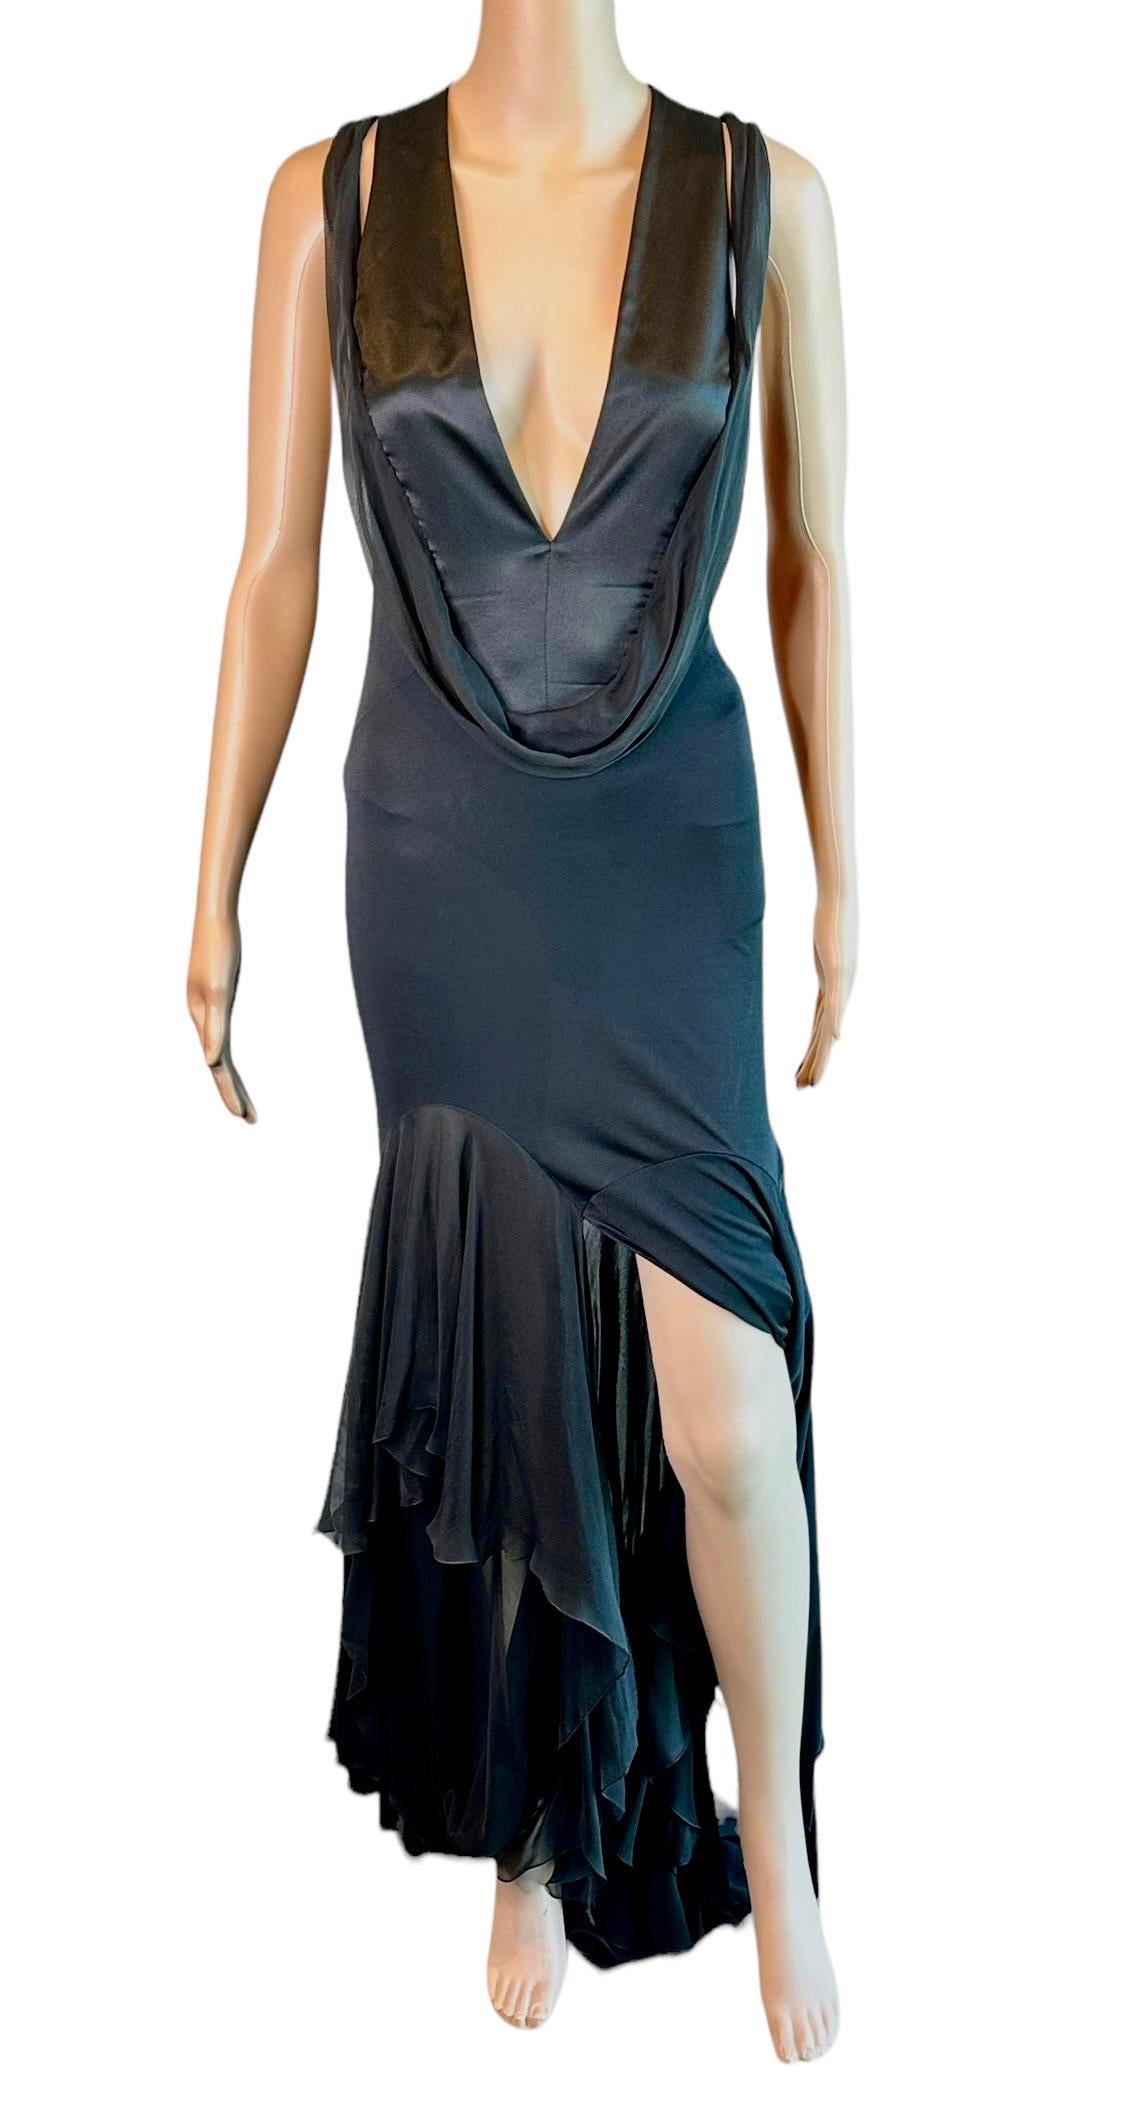 Versace S/S 2004 Plunged Halter Open Back Ruffles Black Evening Dress Gown  For Sale 4